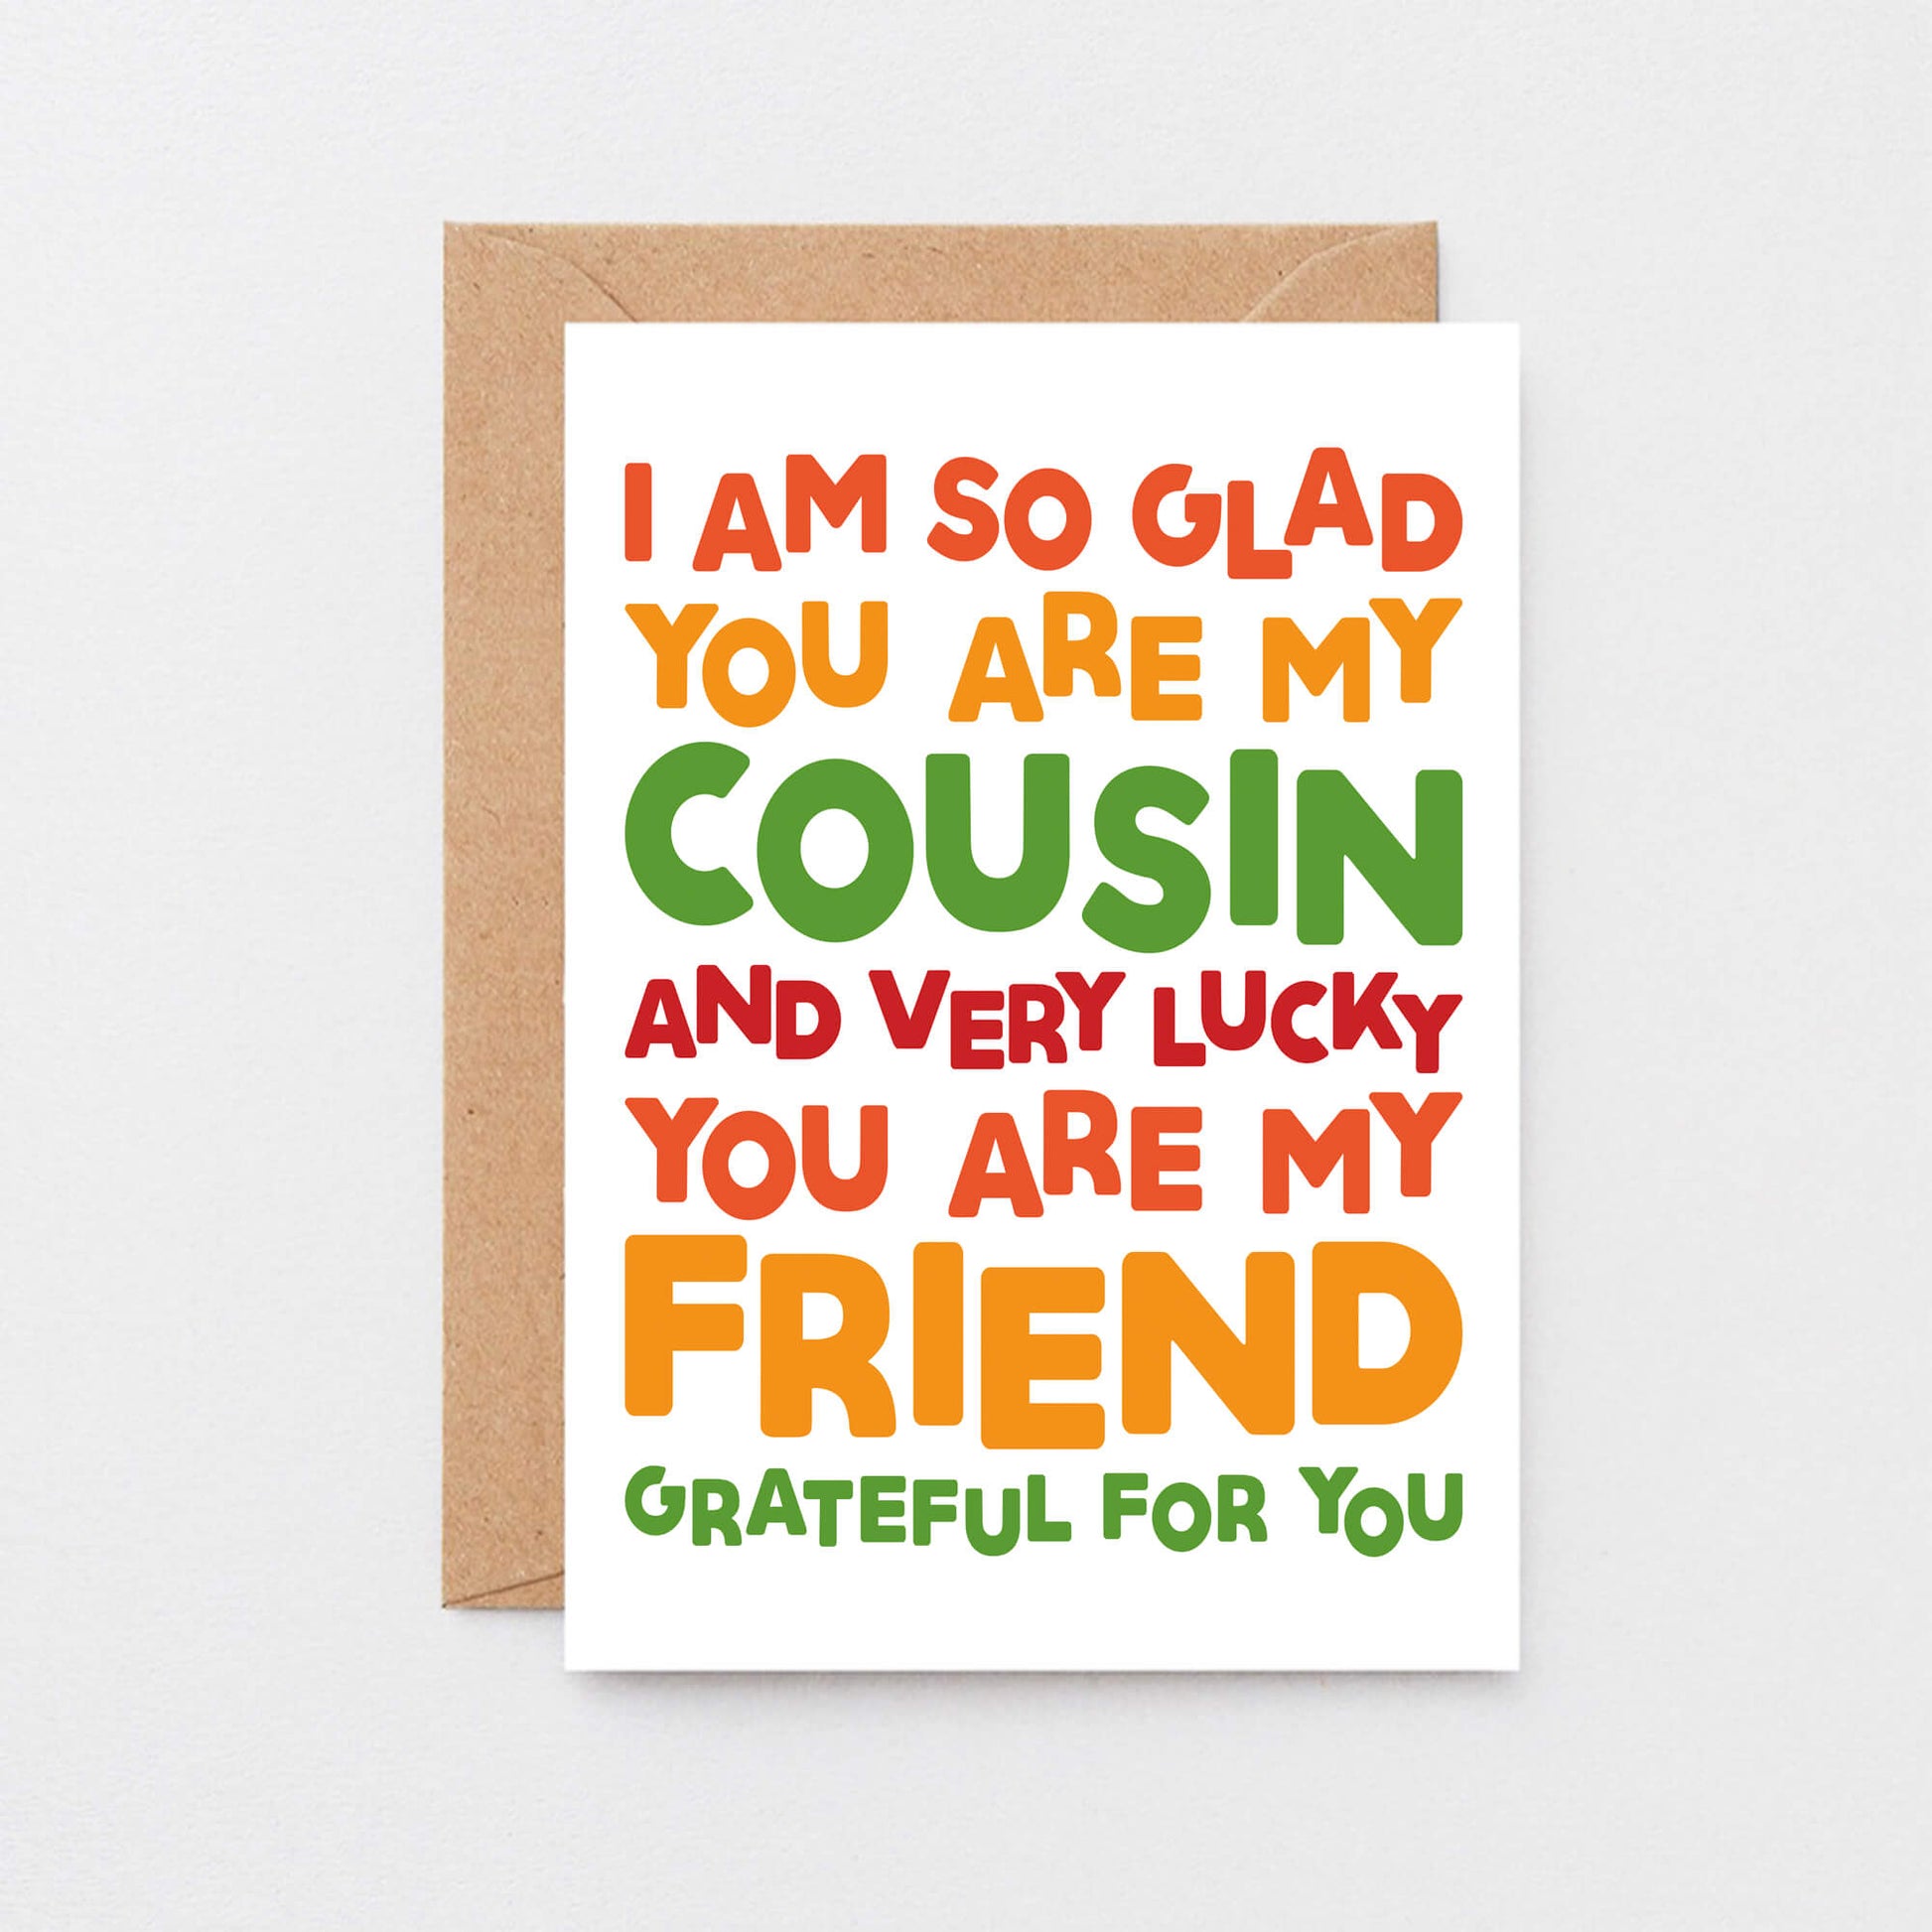 Cousin Card by SixElevenCreations. Reads I am so glad you are my cousin and very lucky you are my friend. Grateful for you. Product Code SE0705A6